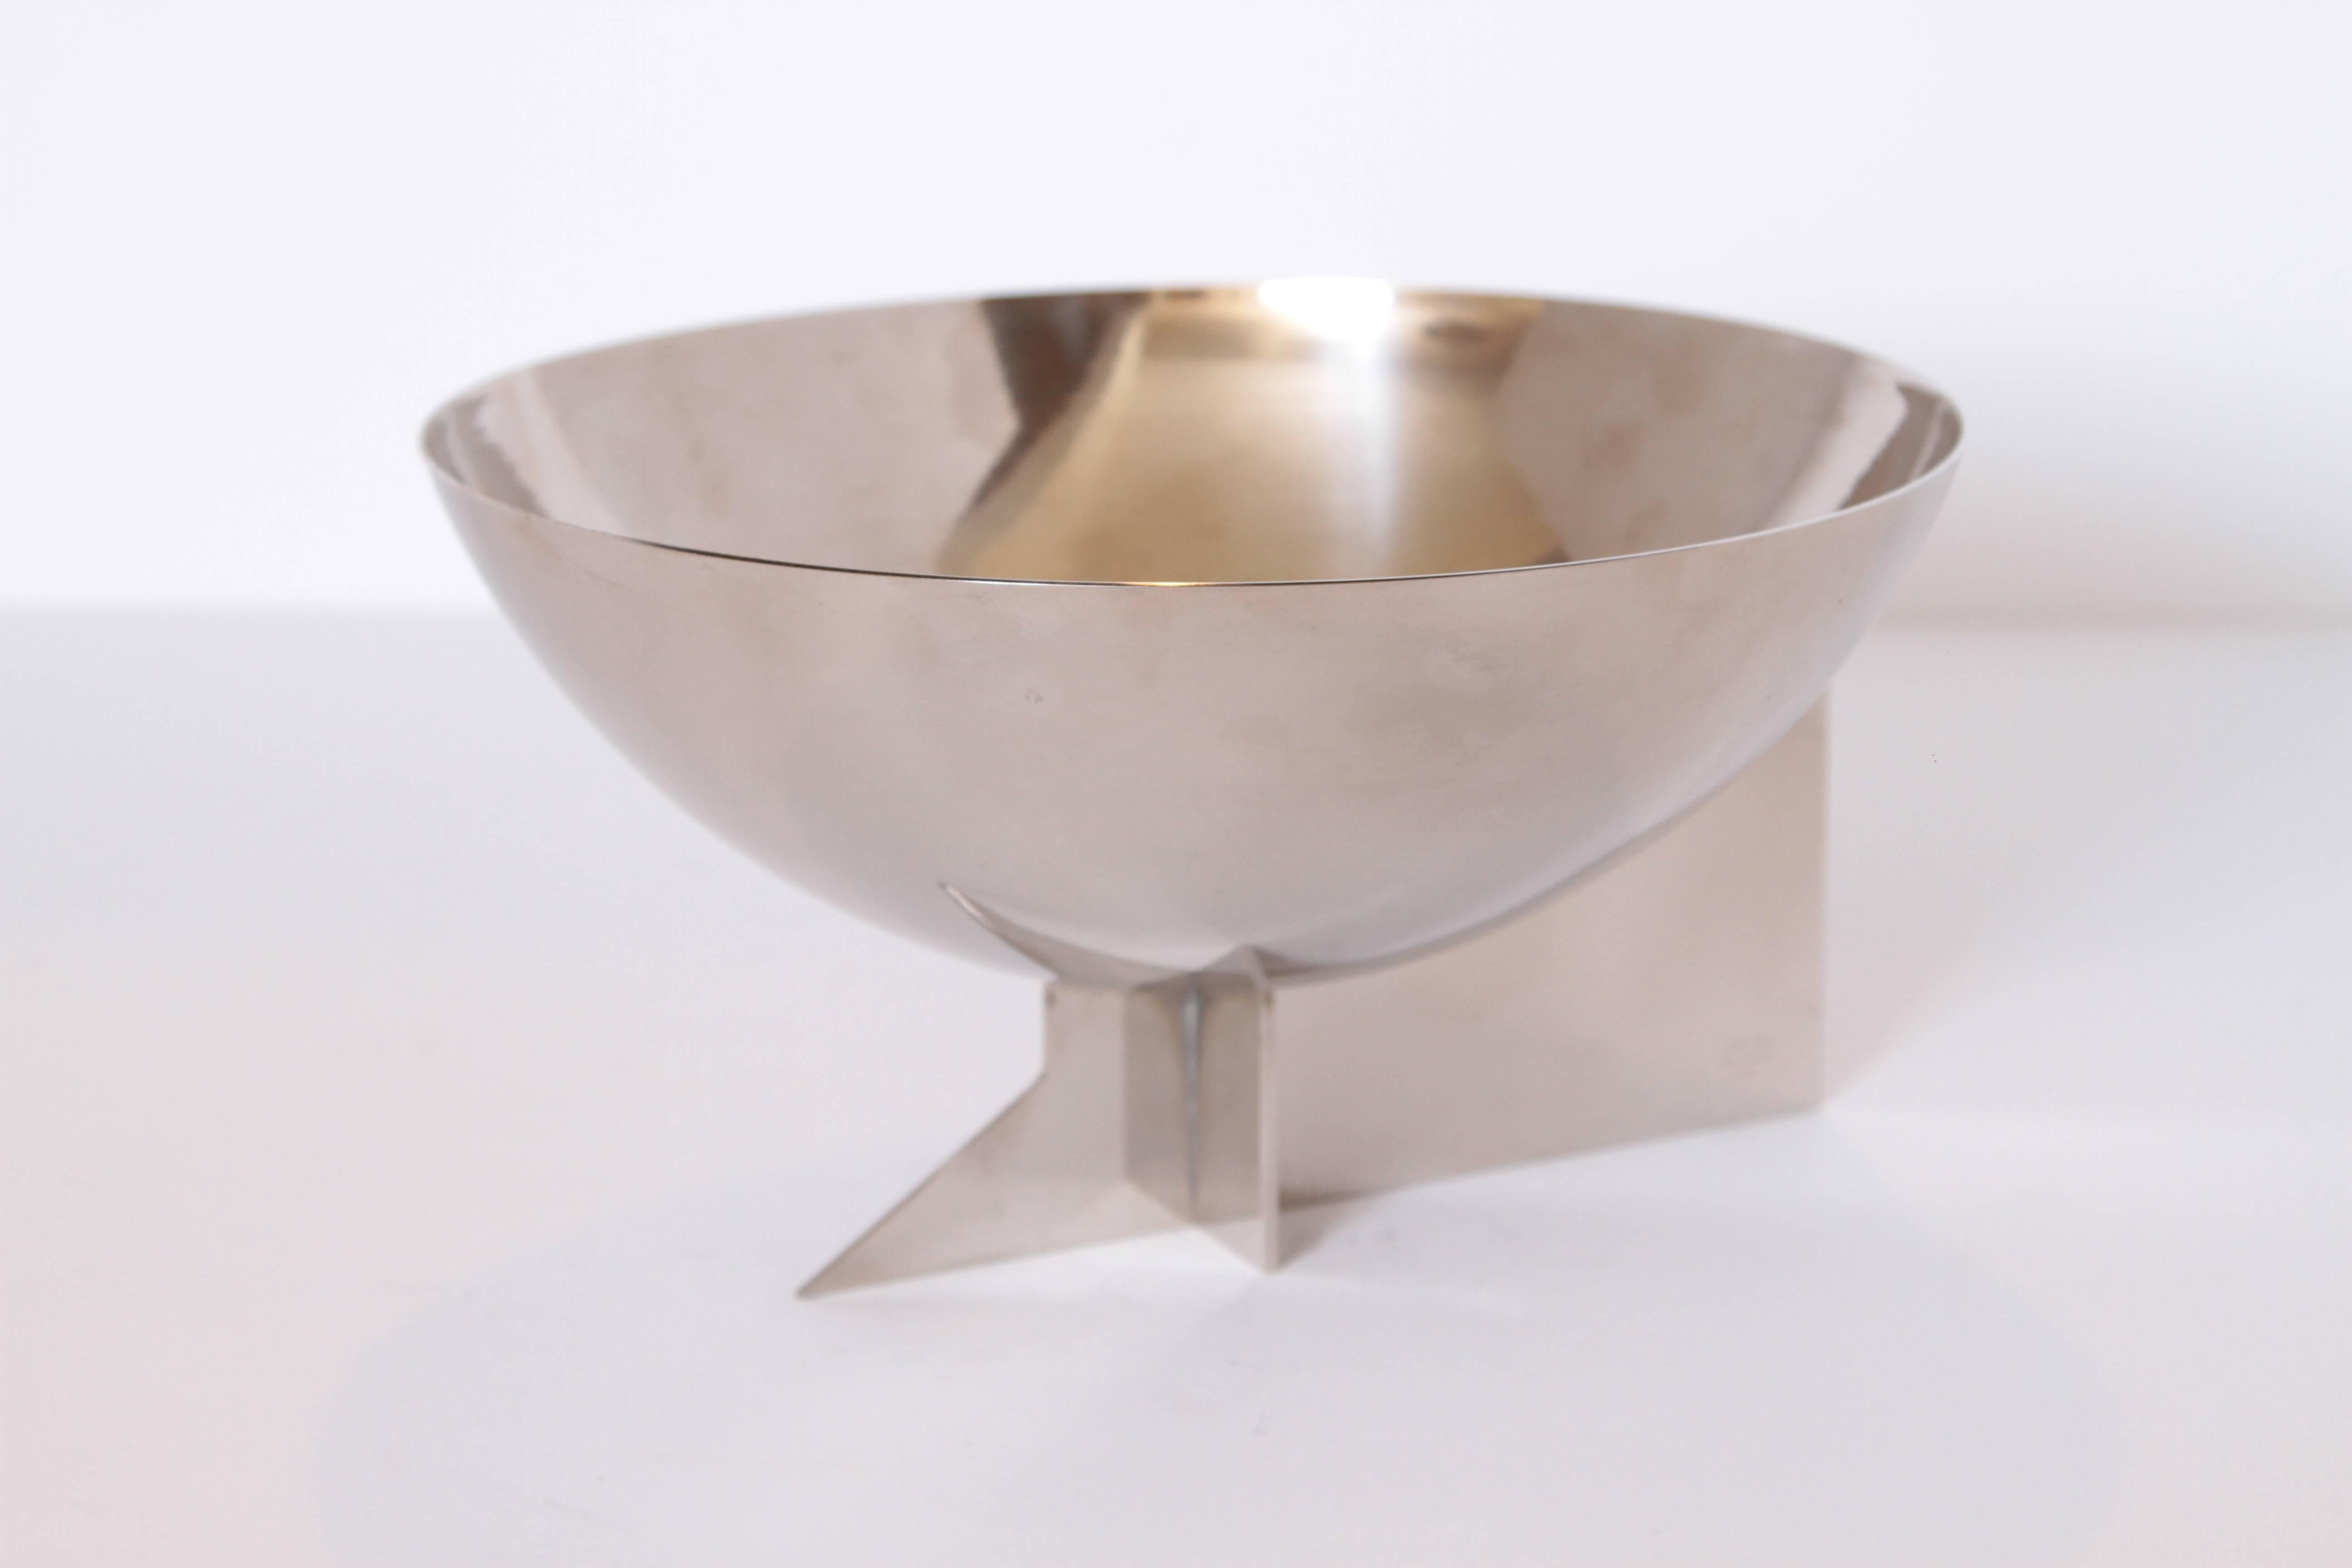 Machine Age Art Deco Signed Desny Silver Plate Centerpiece Bowl

Stunning large version of this classic Modernist late 1920's - early 1930's design.
Marks: DESNY PARIS, MADE IN FRANCE, DEPOSE
Full 6 inches high x 10-5/8 inches diameter

Minor areas